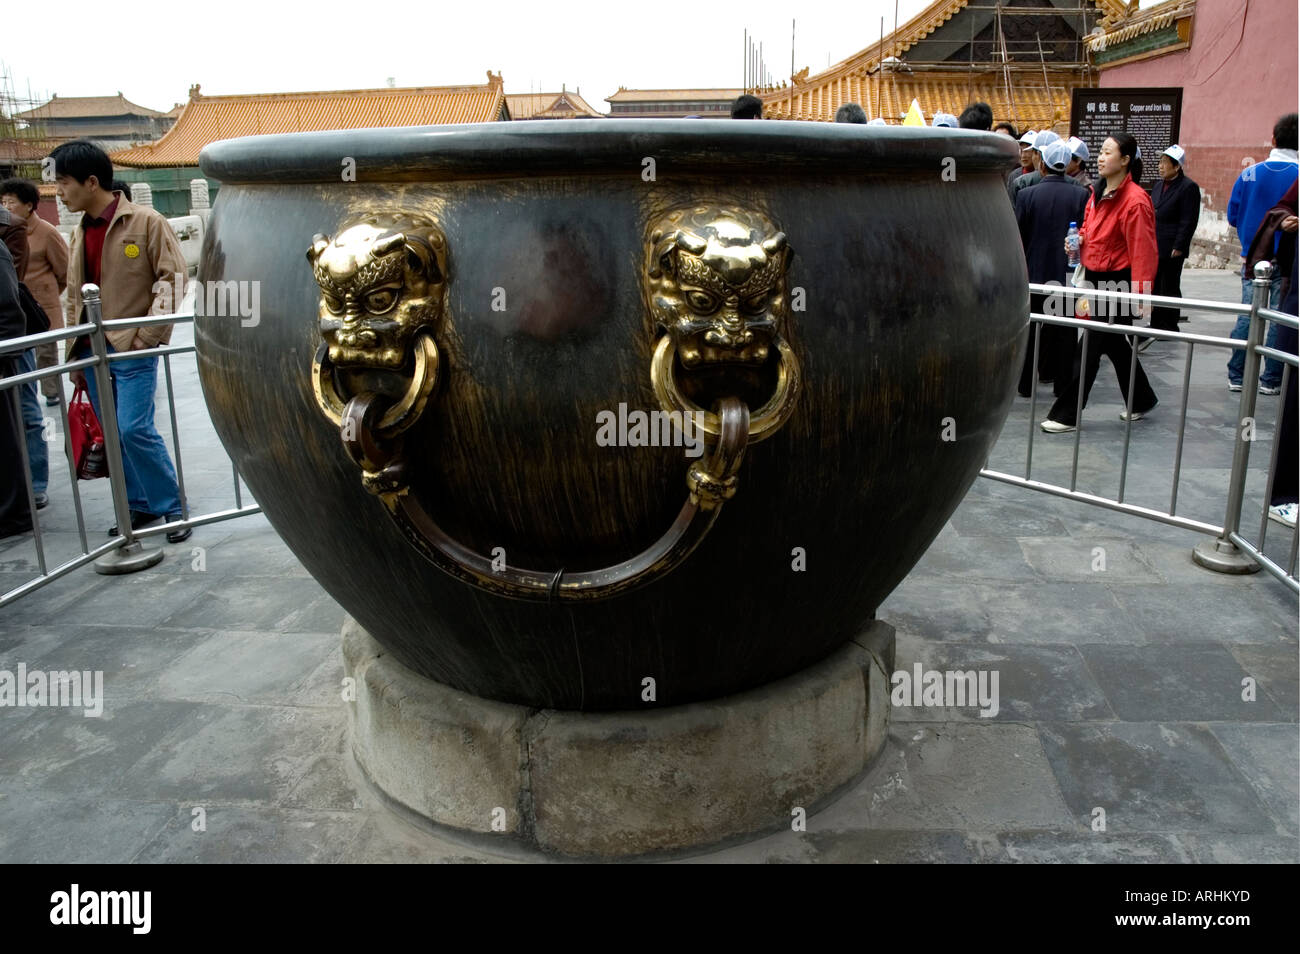 A large gilded bronze vat that held water for extinguishing fires with most of the  gilding scraped off, Forbidden City, Beijing Stock Photo